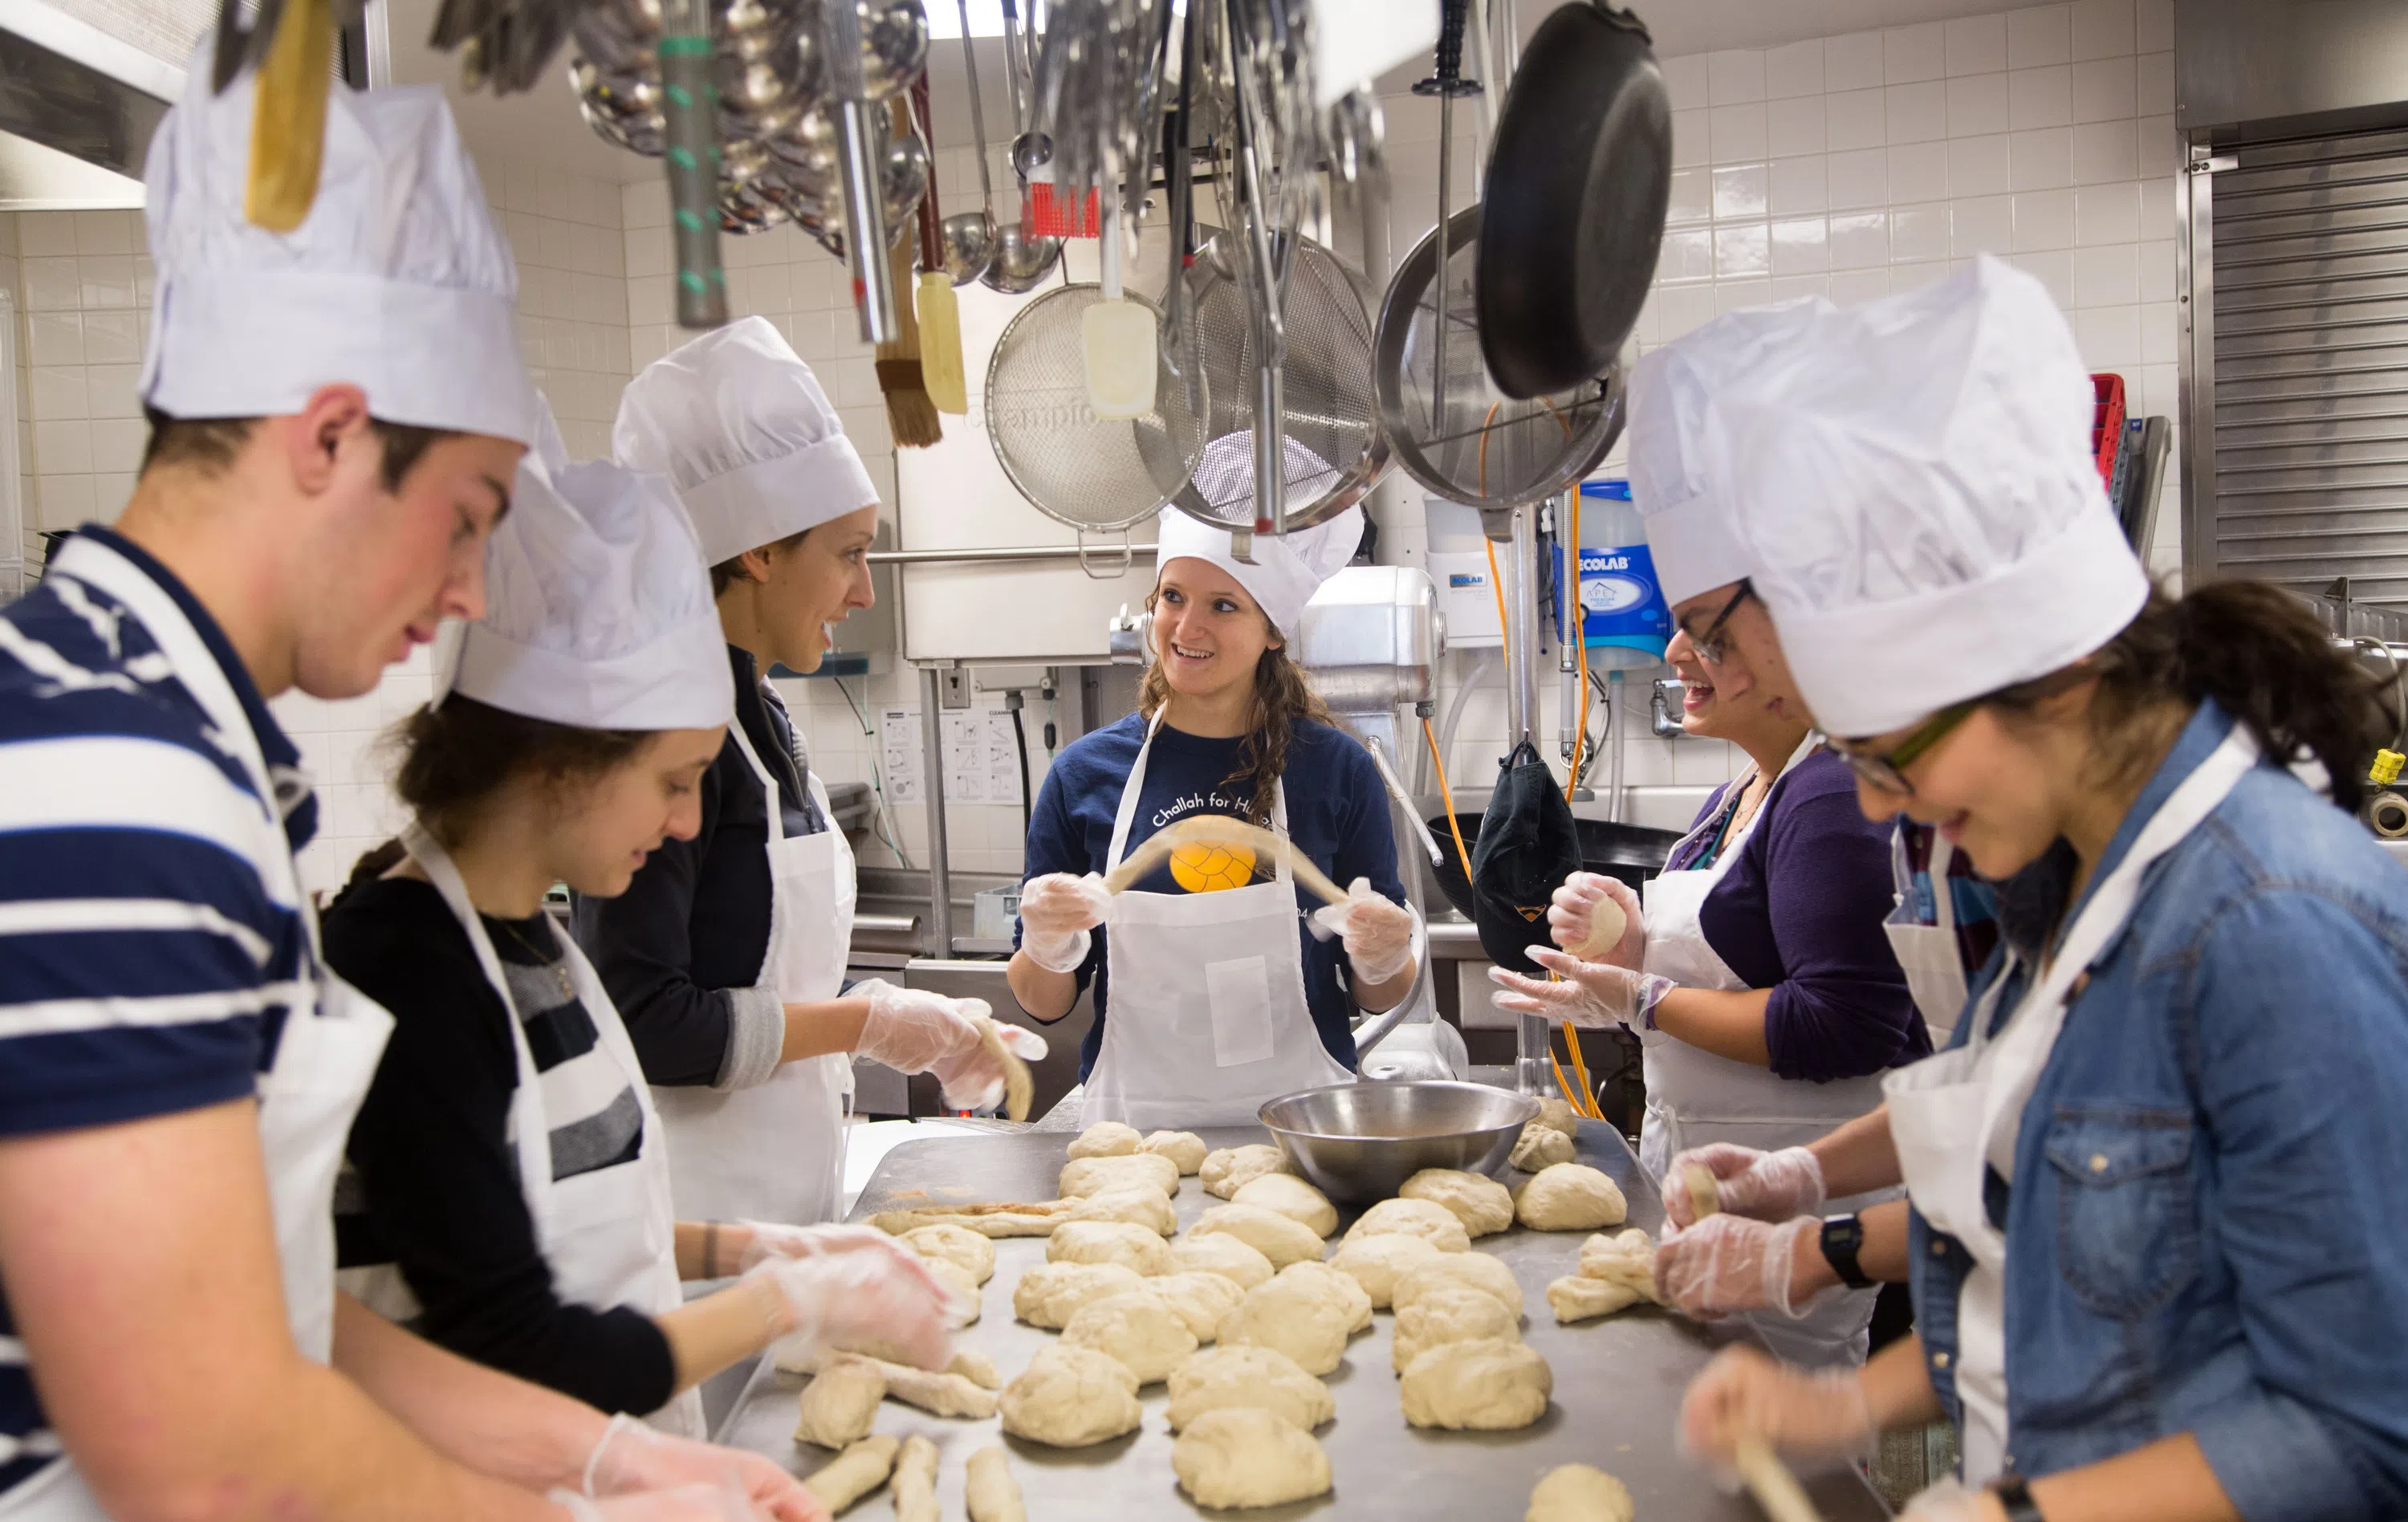 Students making braided challah bread in a kitchen 